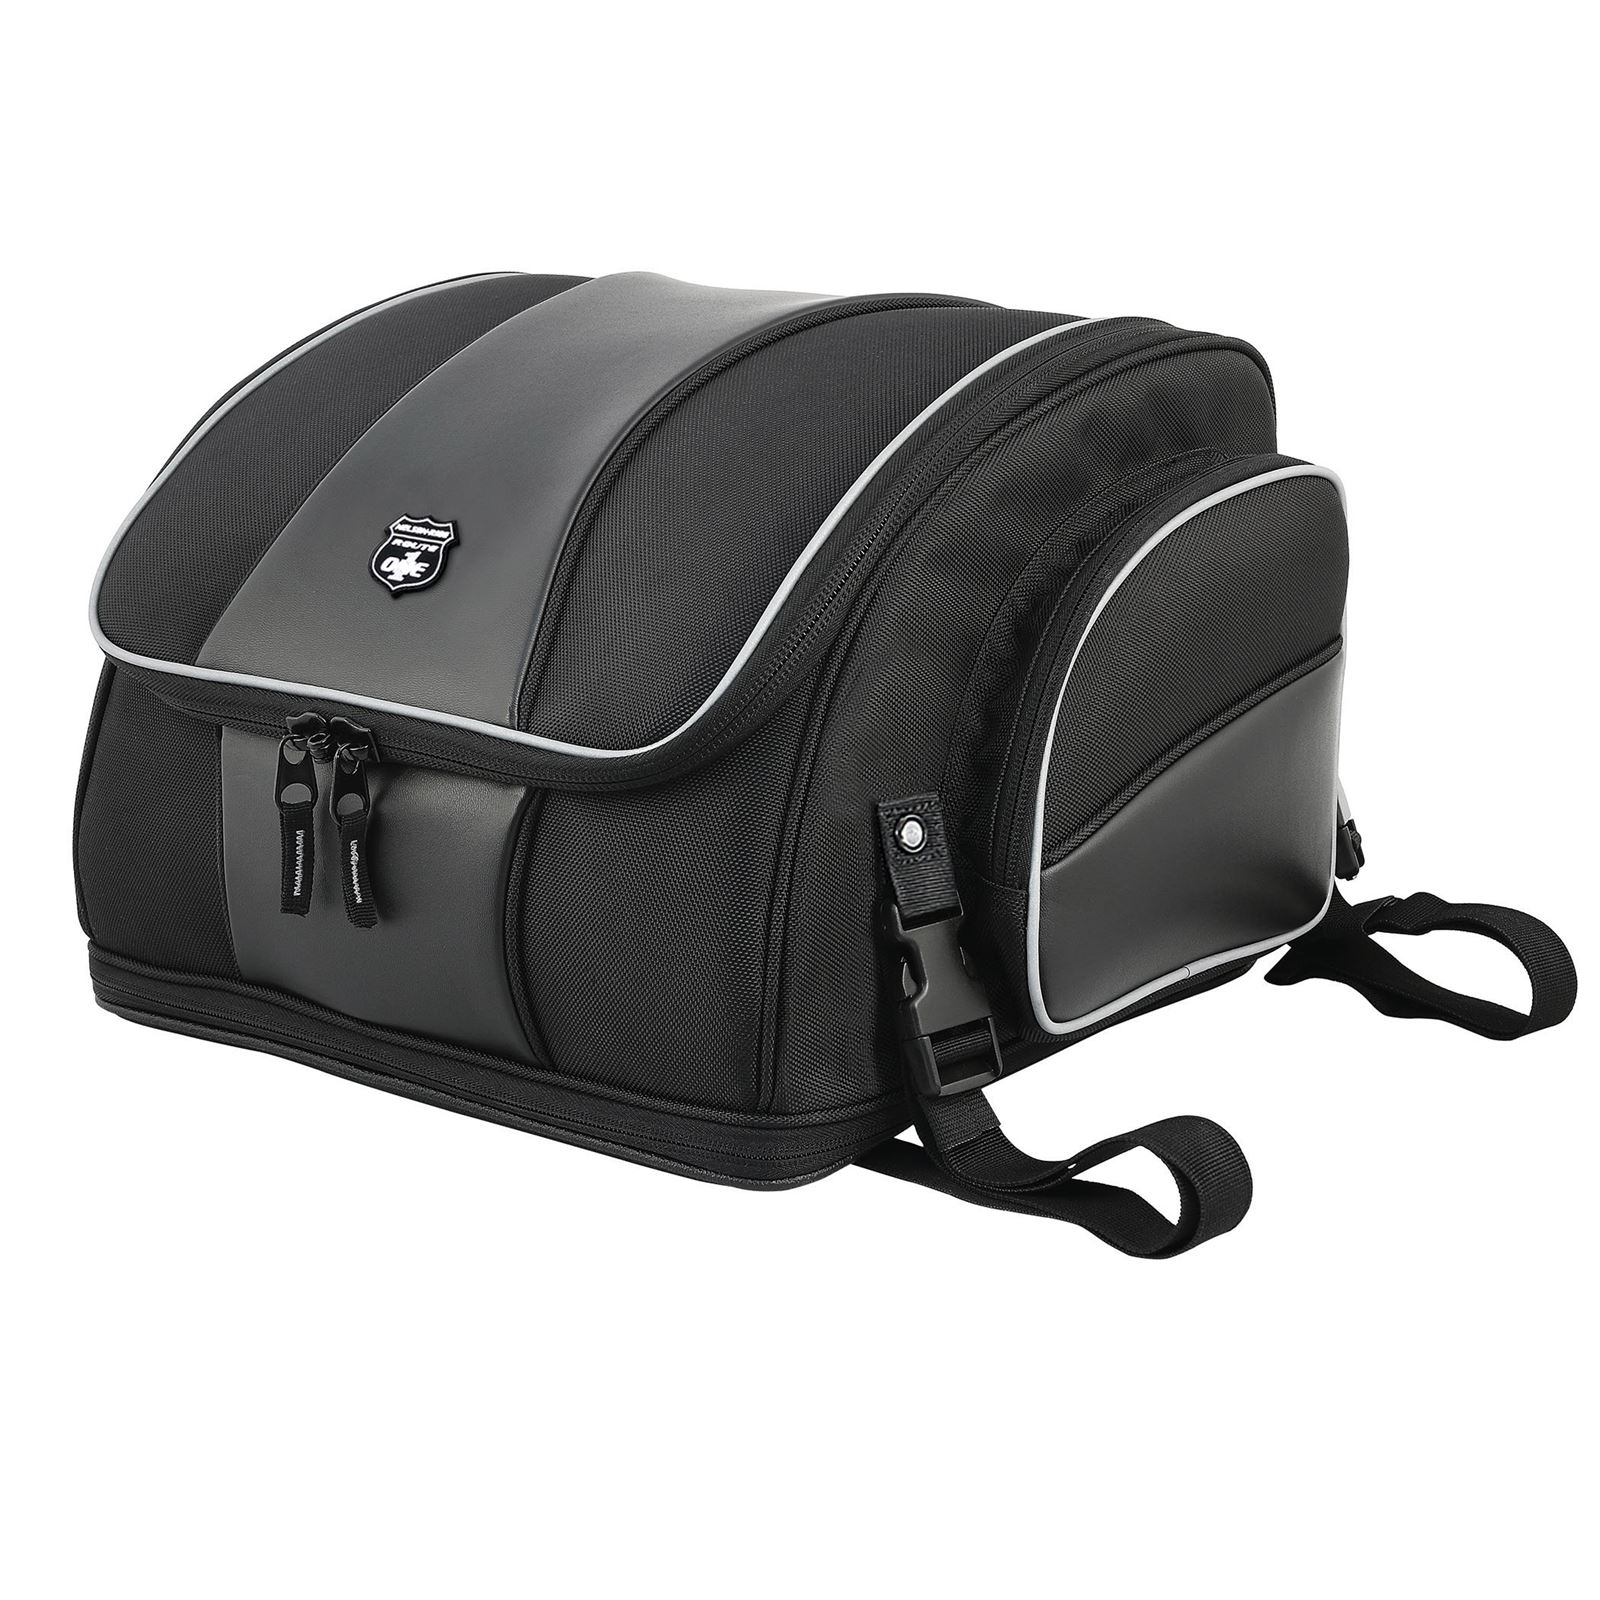 Nelson-Rigg Route 1 Weekender NR-215 Bag